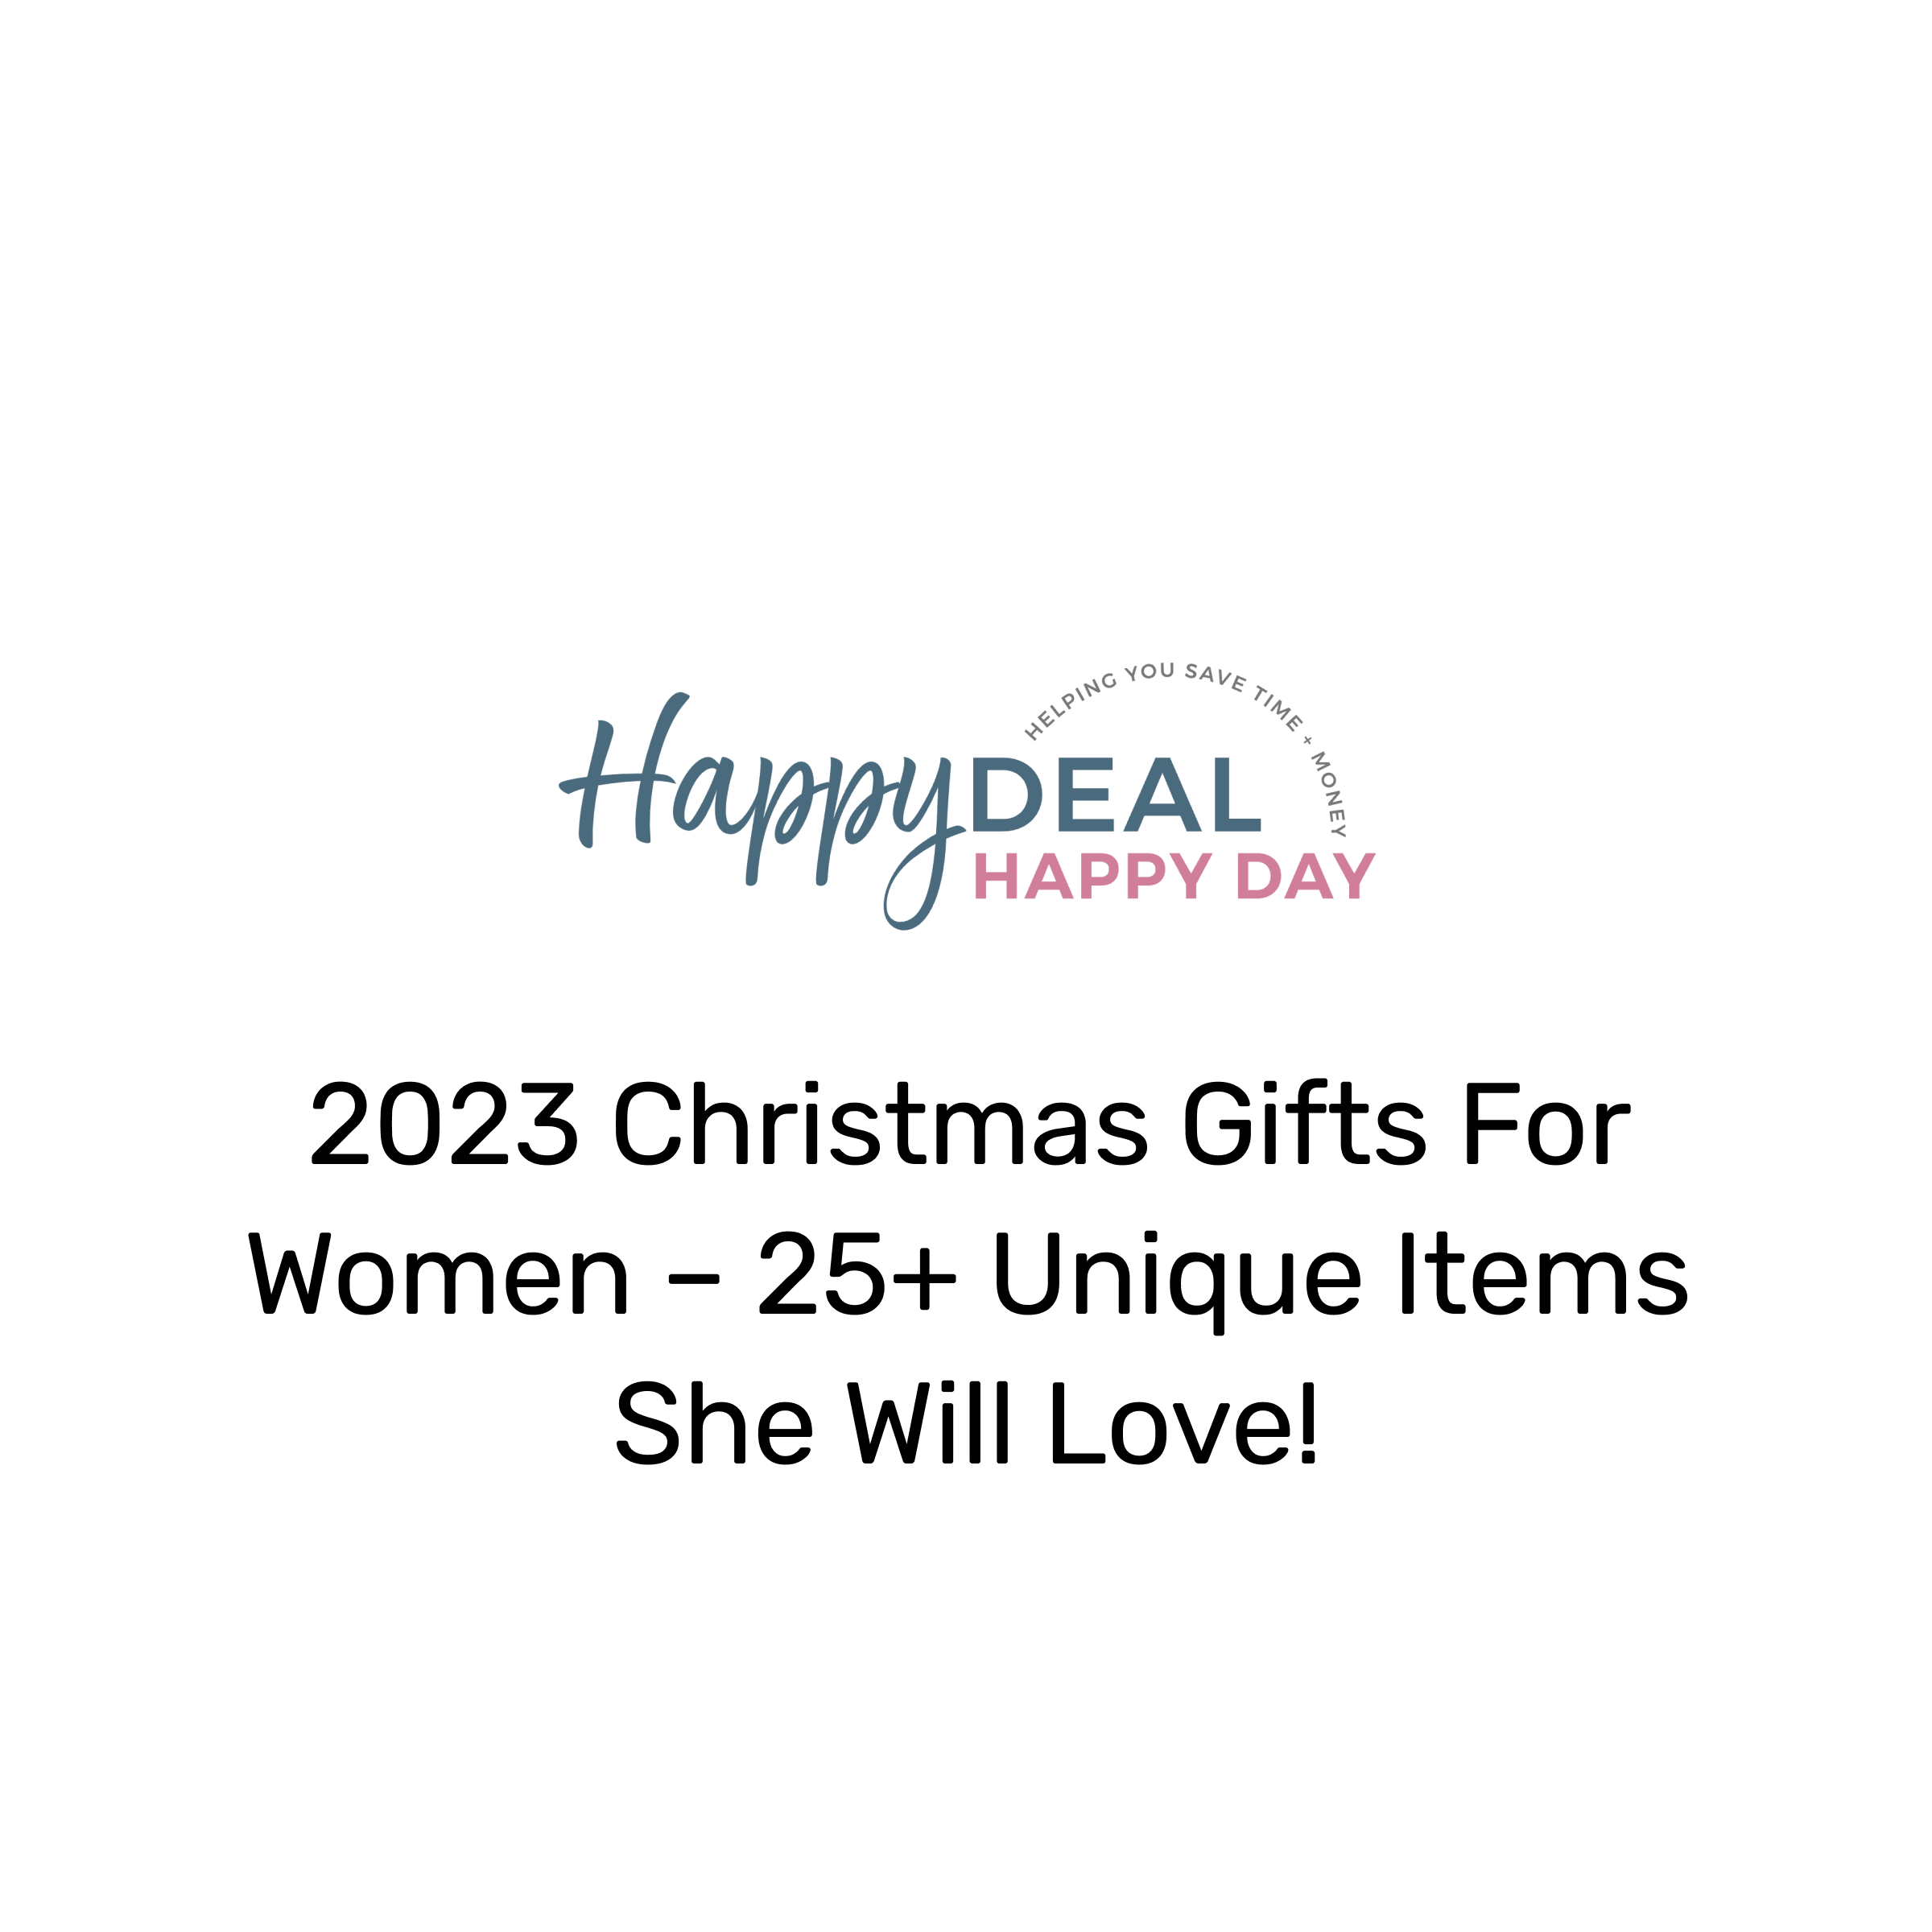 Happy Deal Happy Day!